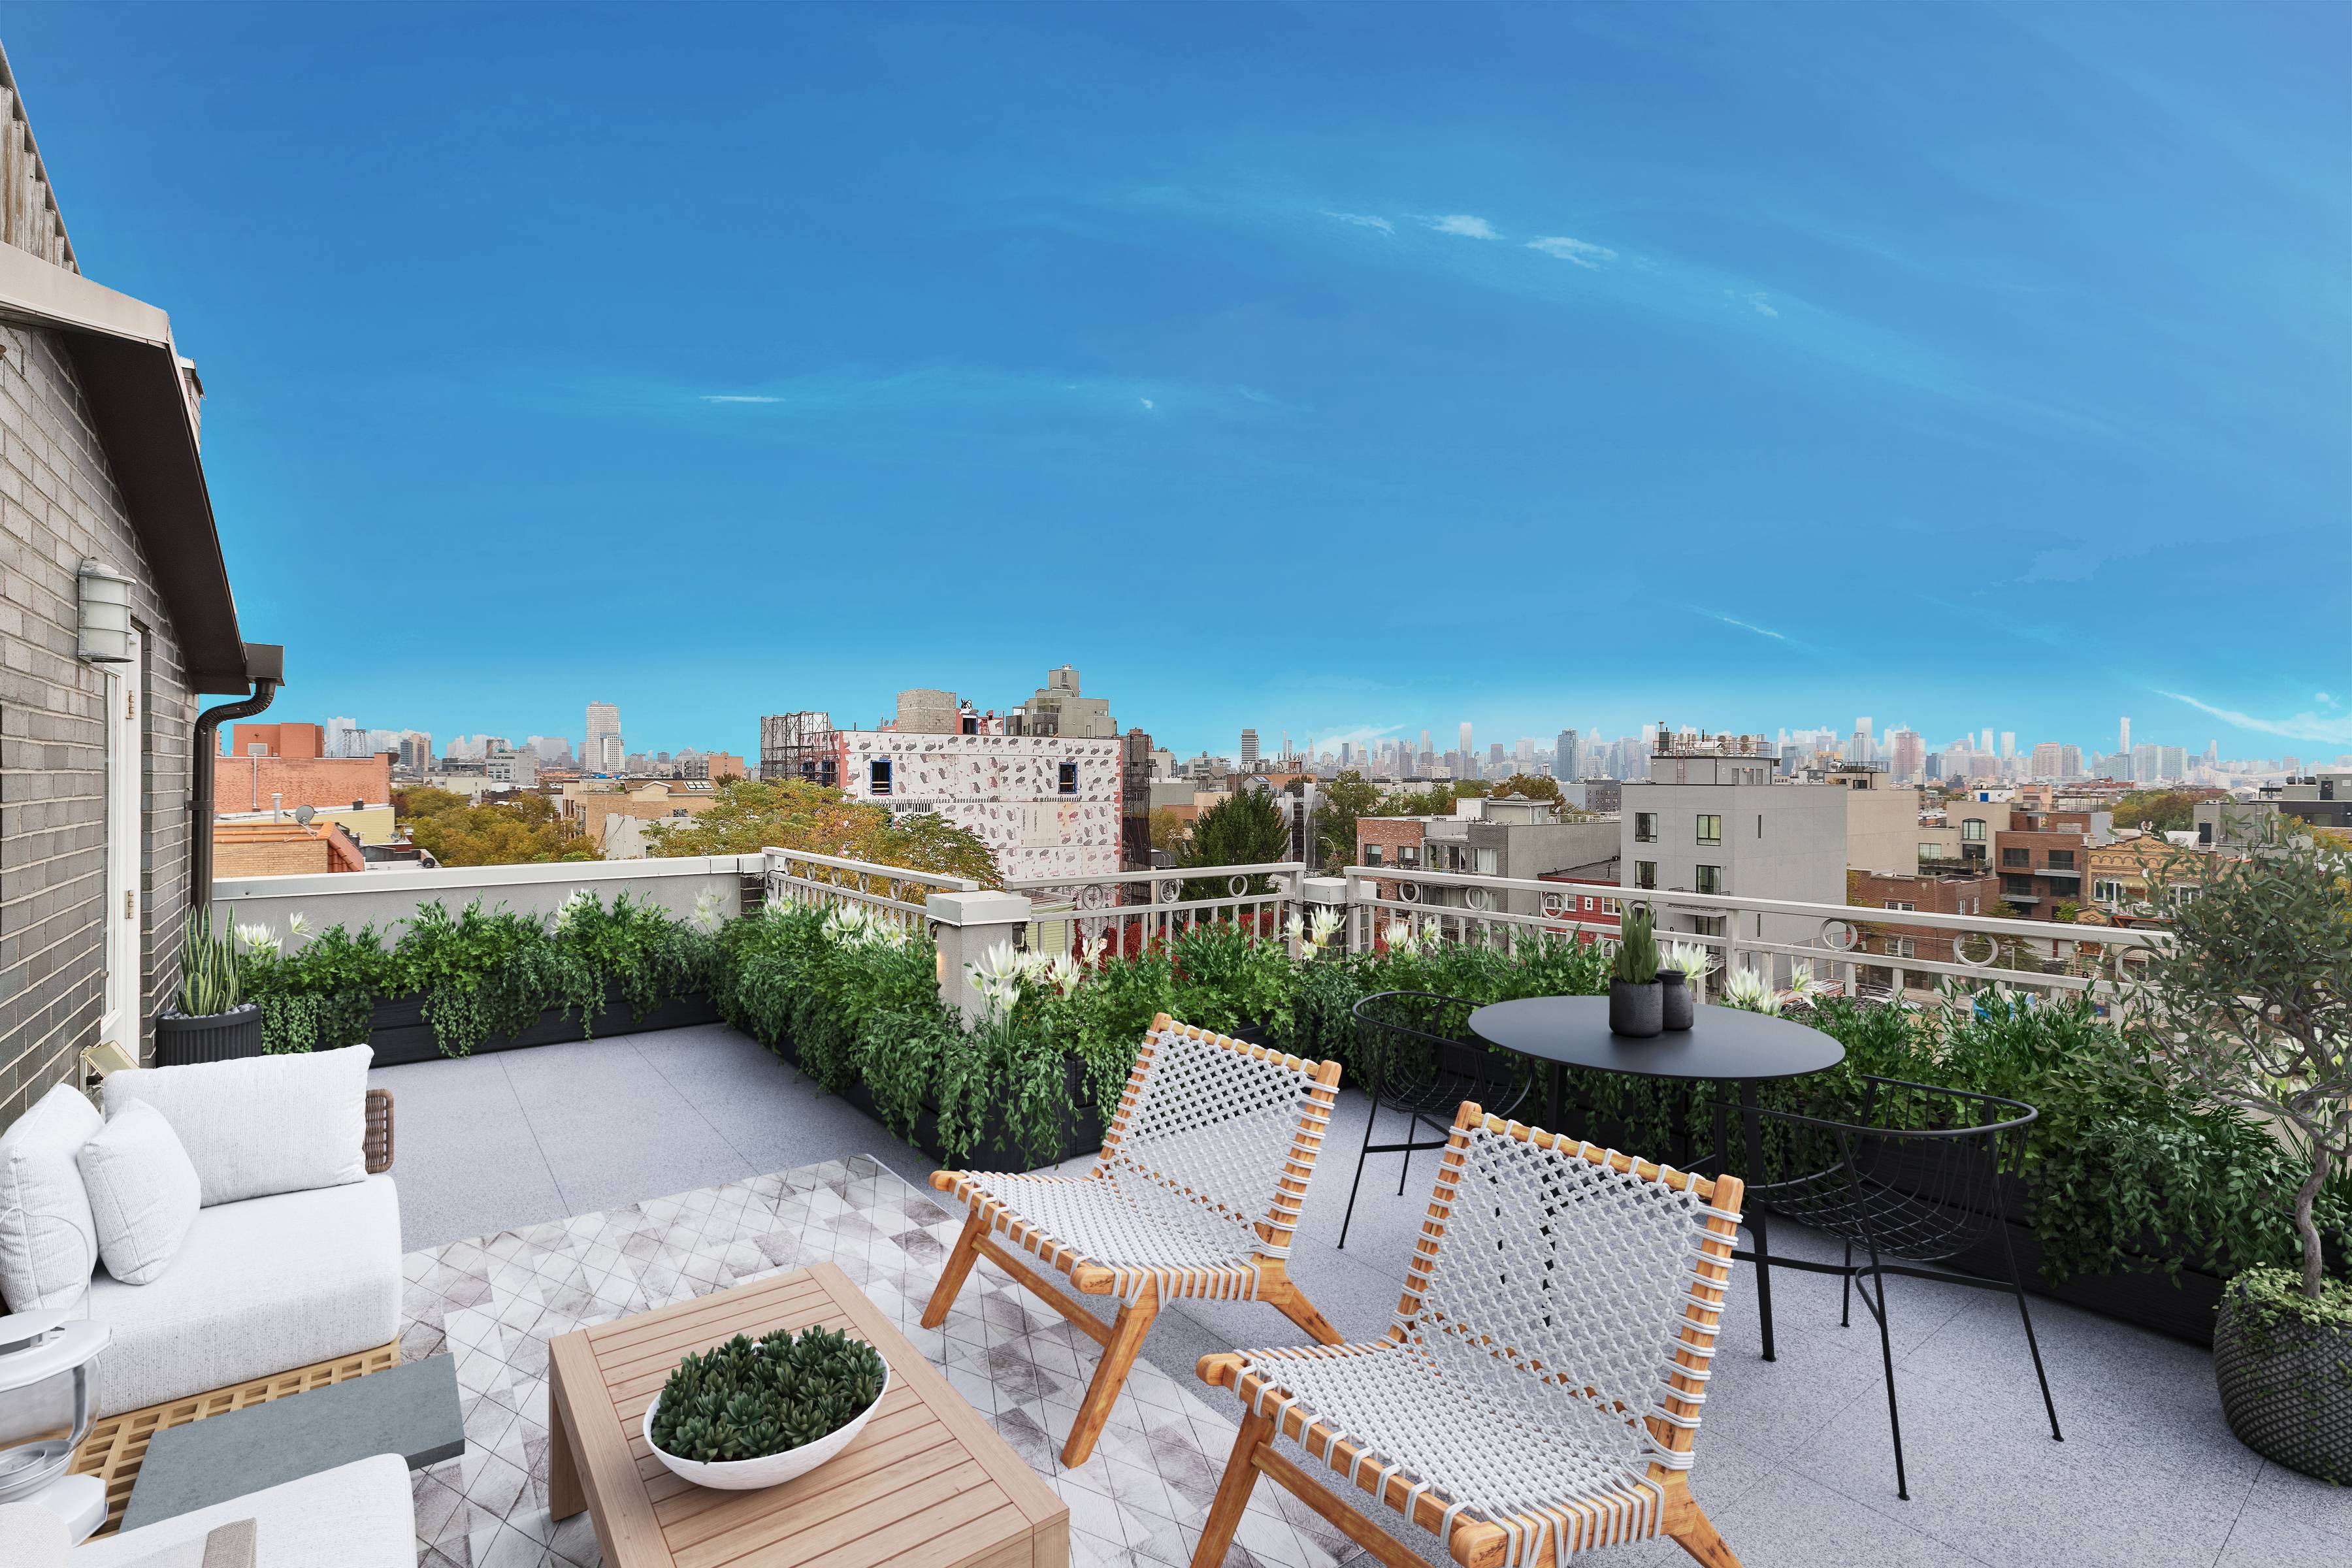 Back on the market ! Live on top of it all and soar above other surrounding buildings with direct Manhattan skyline views from your own Private Roof Deck !